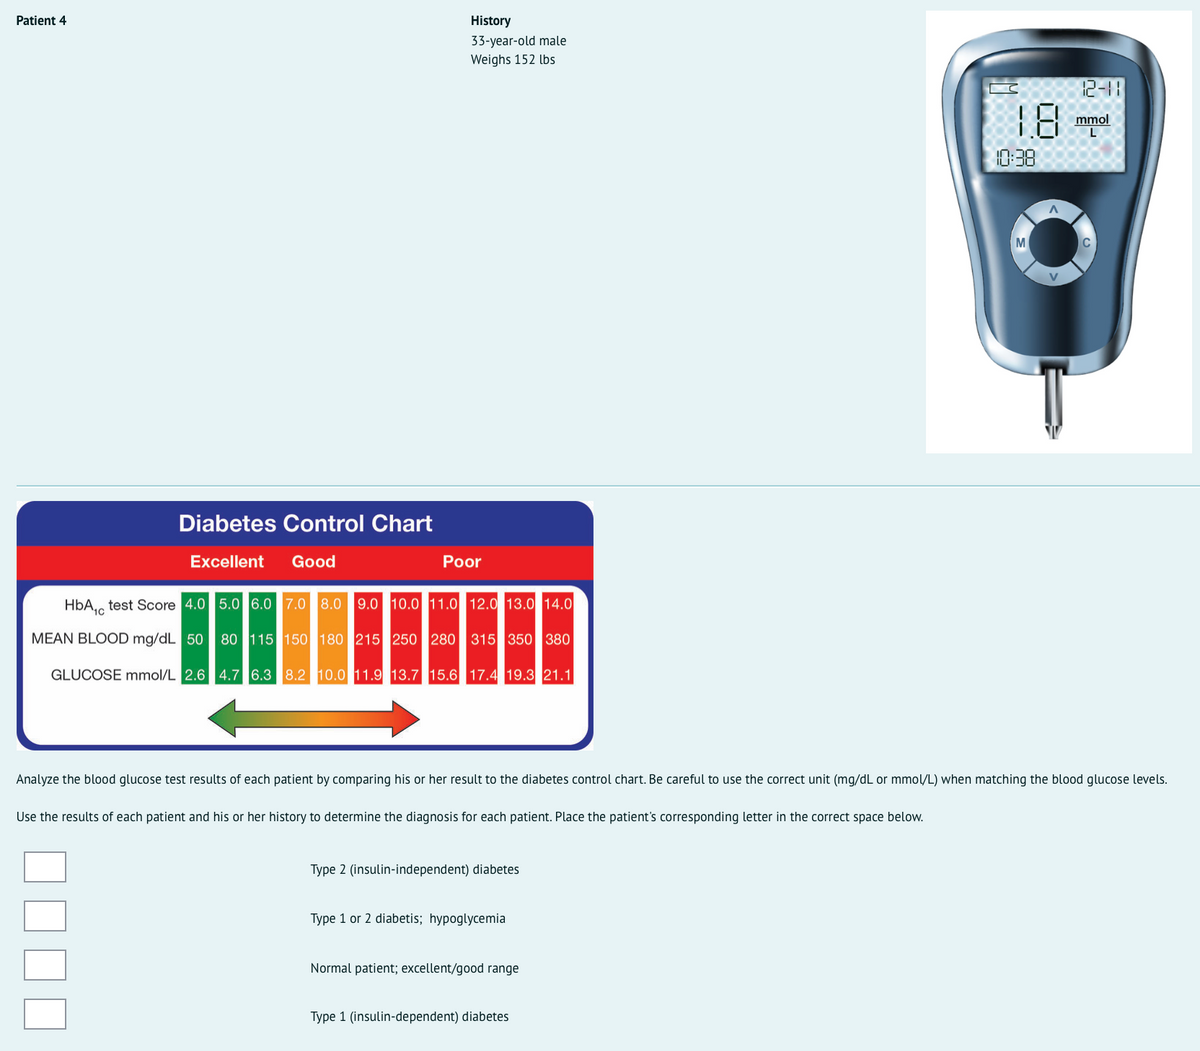 Answered Diabetes Control Chart Excellent Good Bartleby